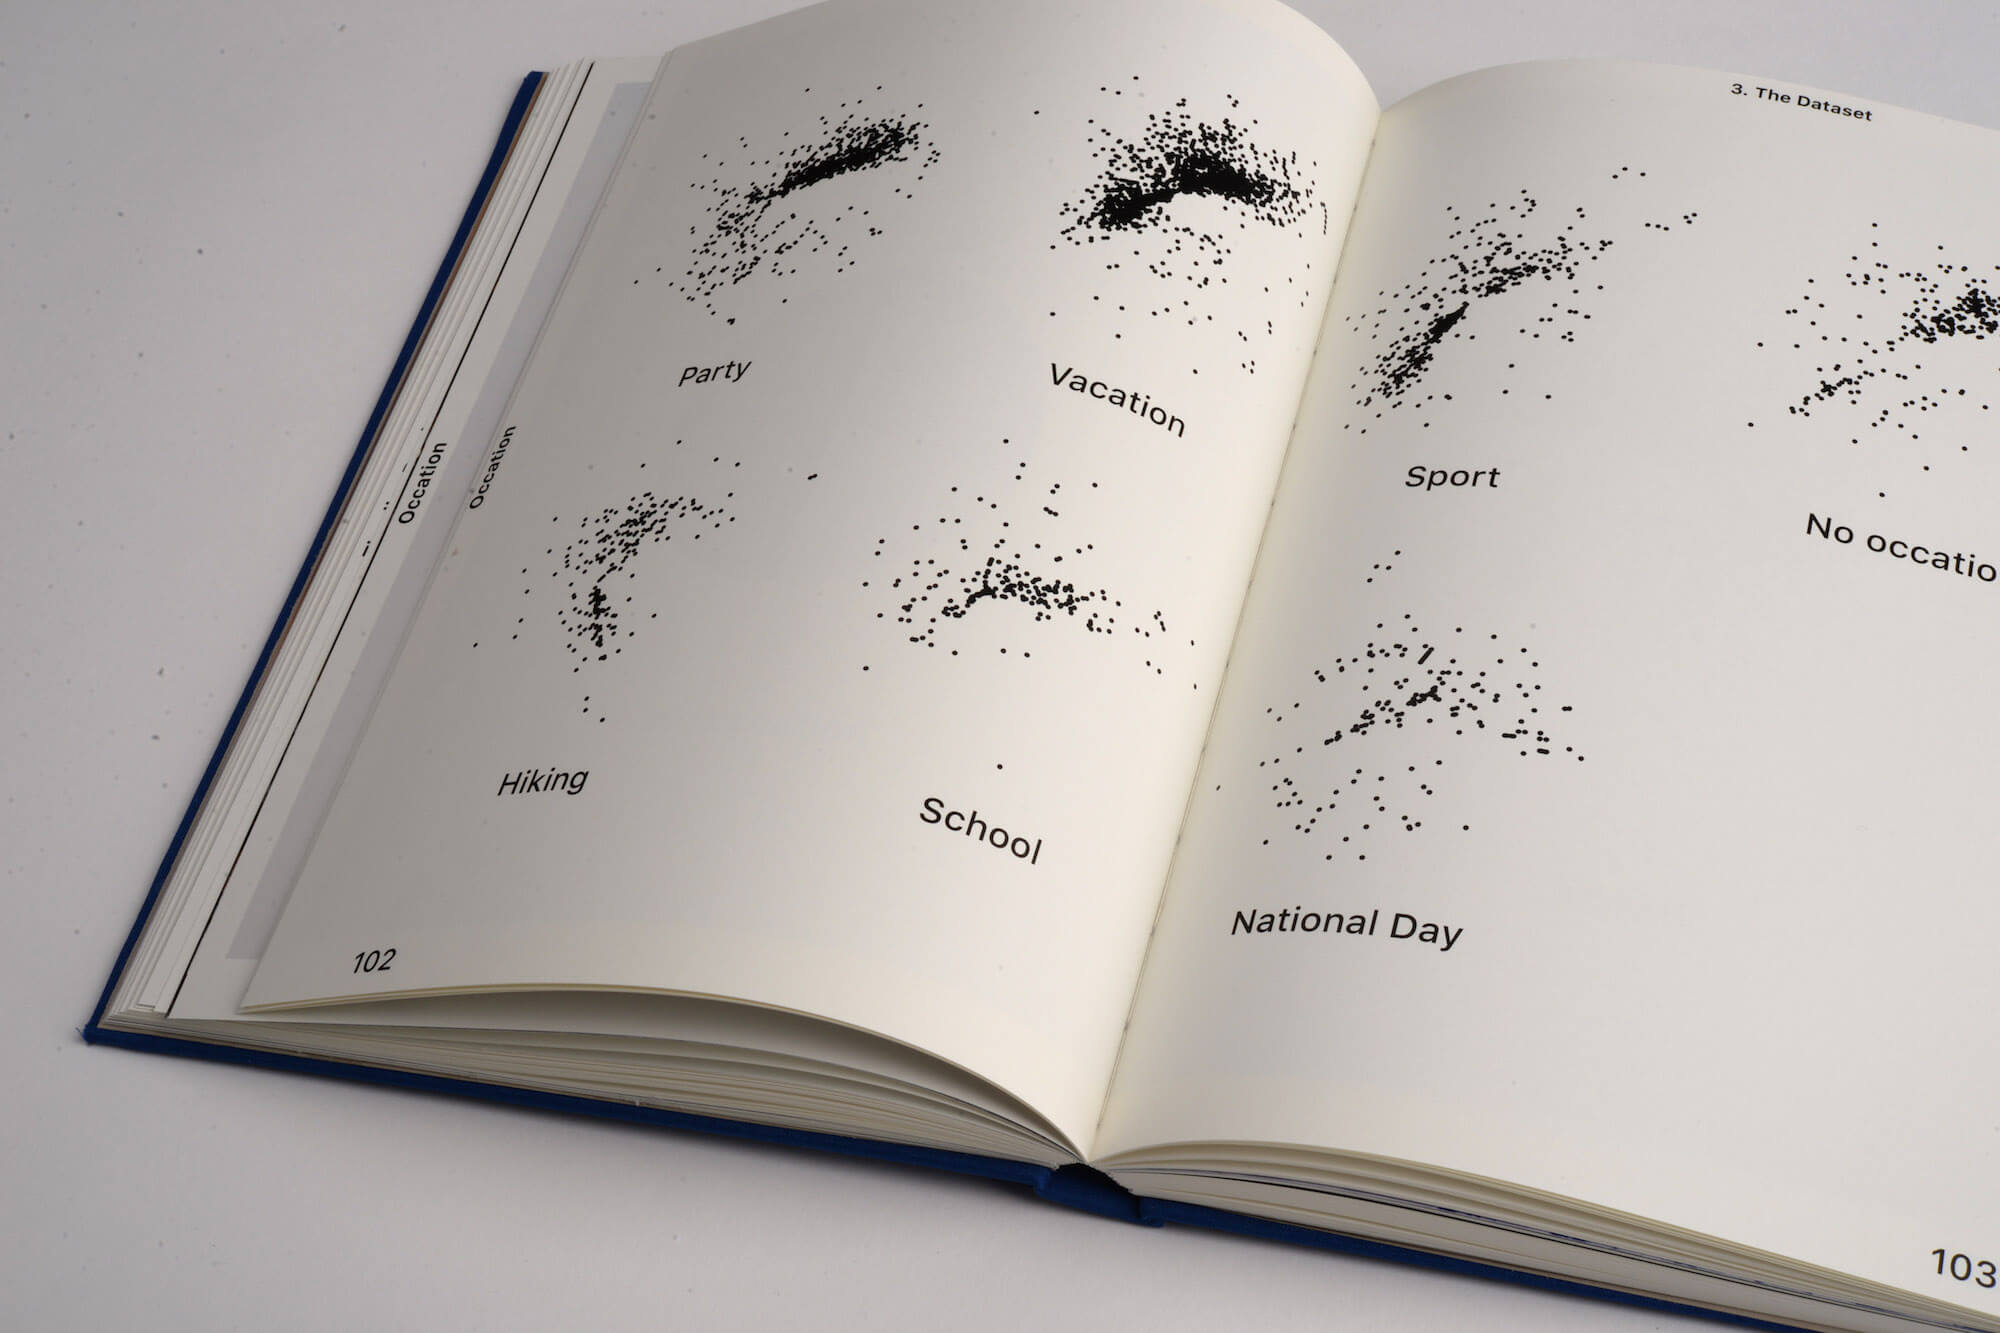 Visualising activities with dots in a book